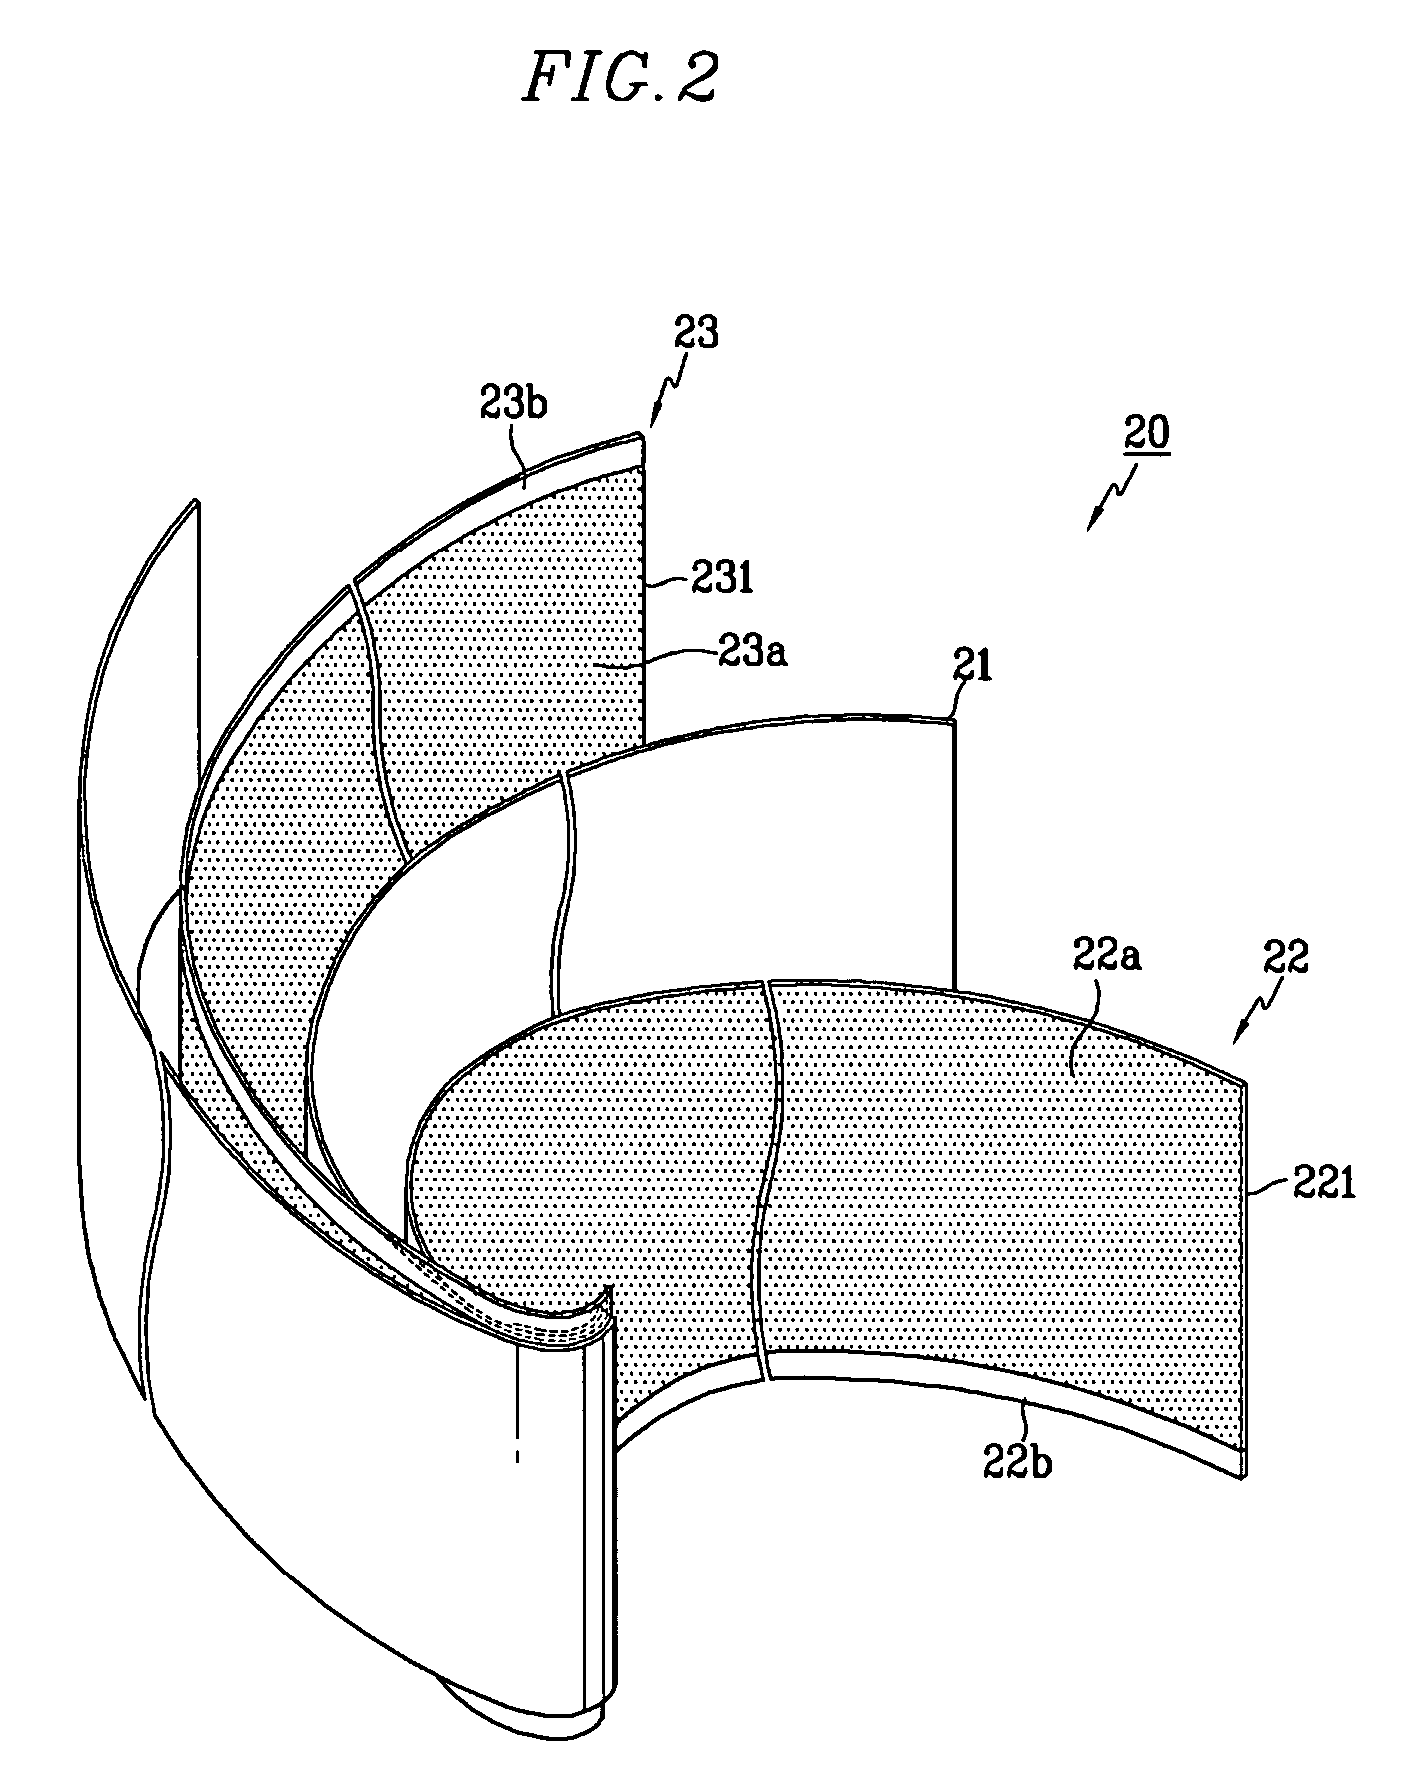 Secondary battery having a current collecting plate with improved welding characteristics